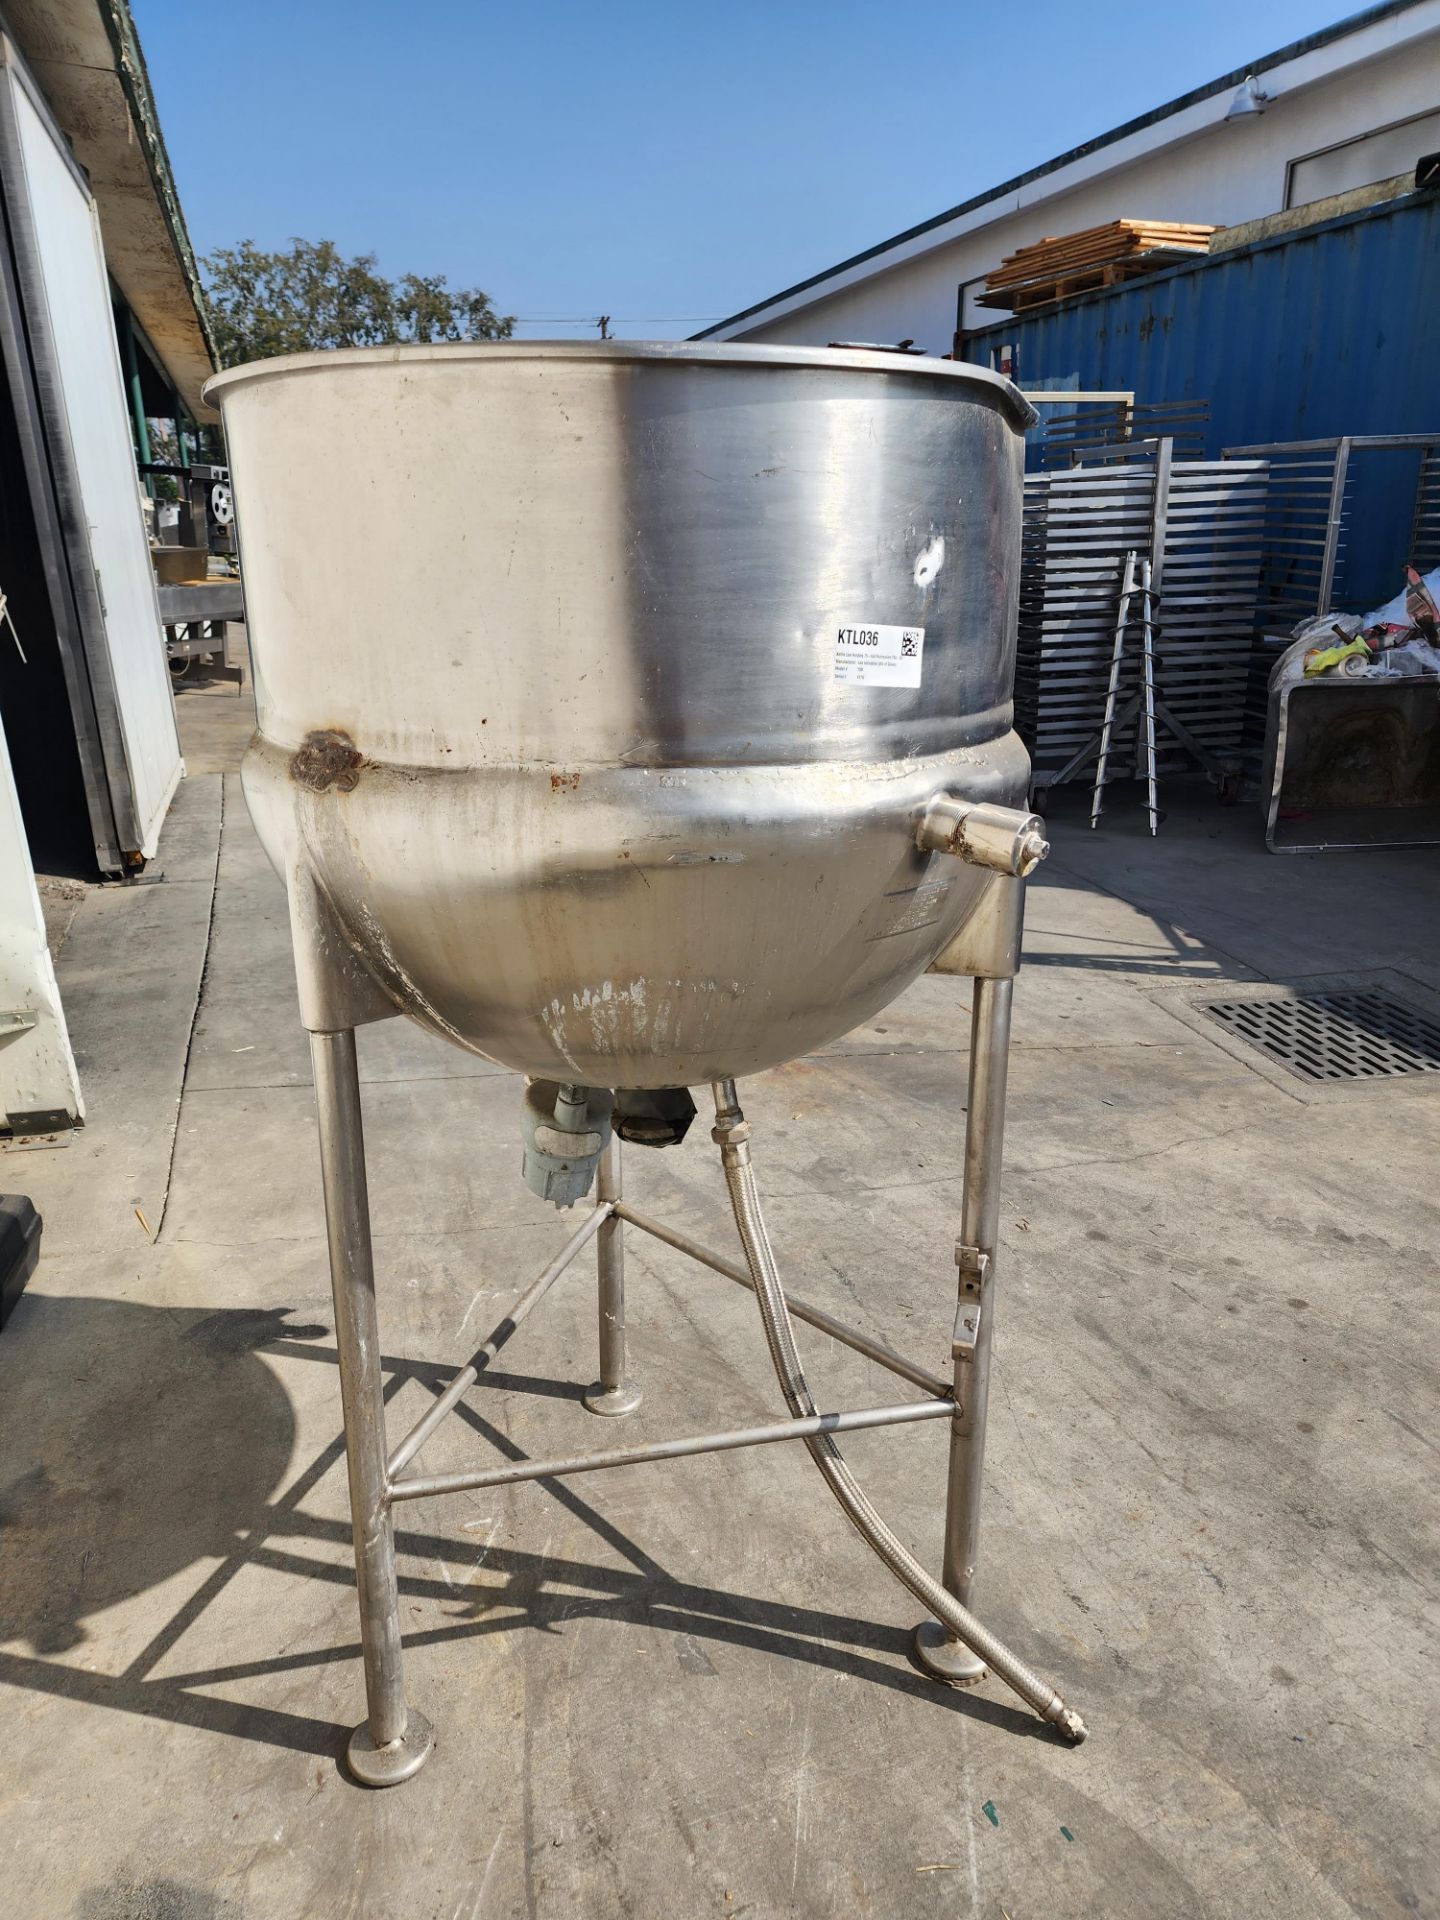 Lee Steam Fired Jacketed Kettle, Model 75D, SN 417 U, 75 Gallon Capacity. - Image 4 of 8